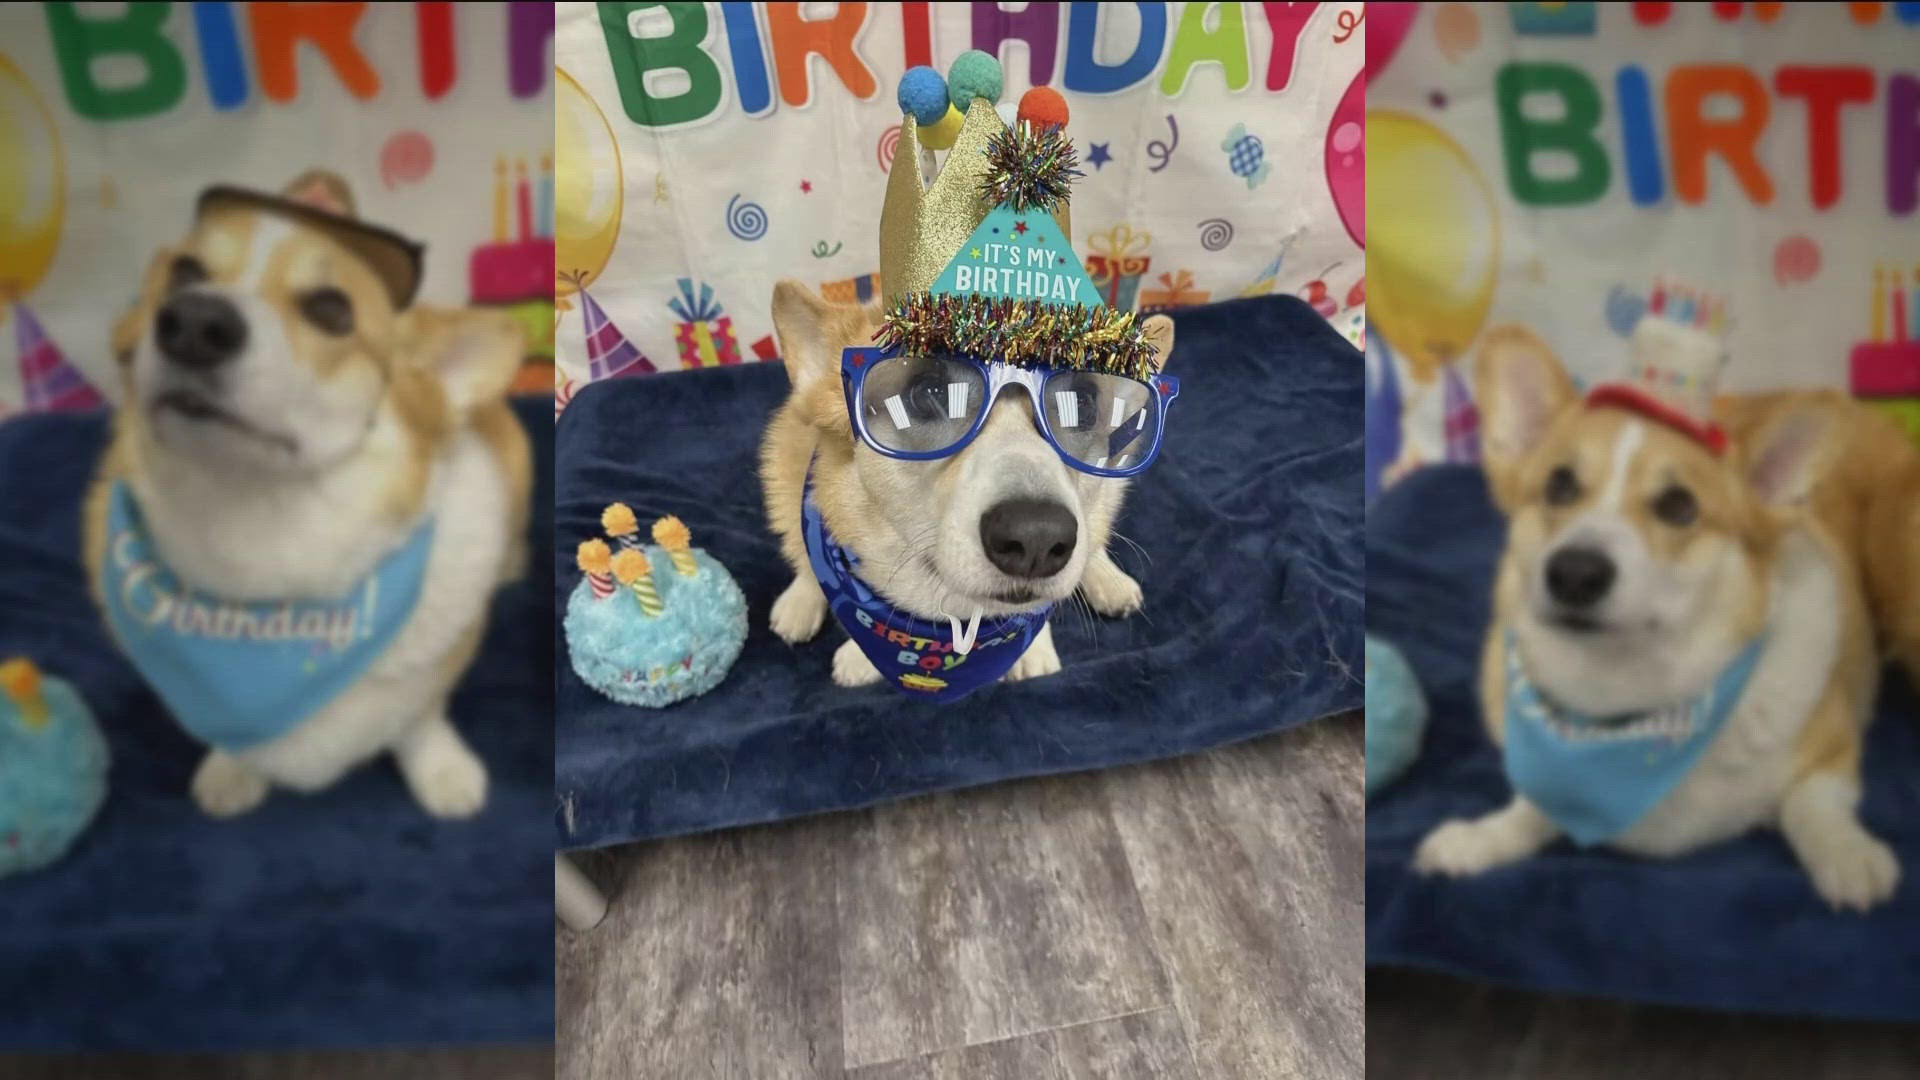 Frank Loth shared a photo of his dog Finn who just celebrated his 6th birthday.